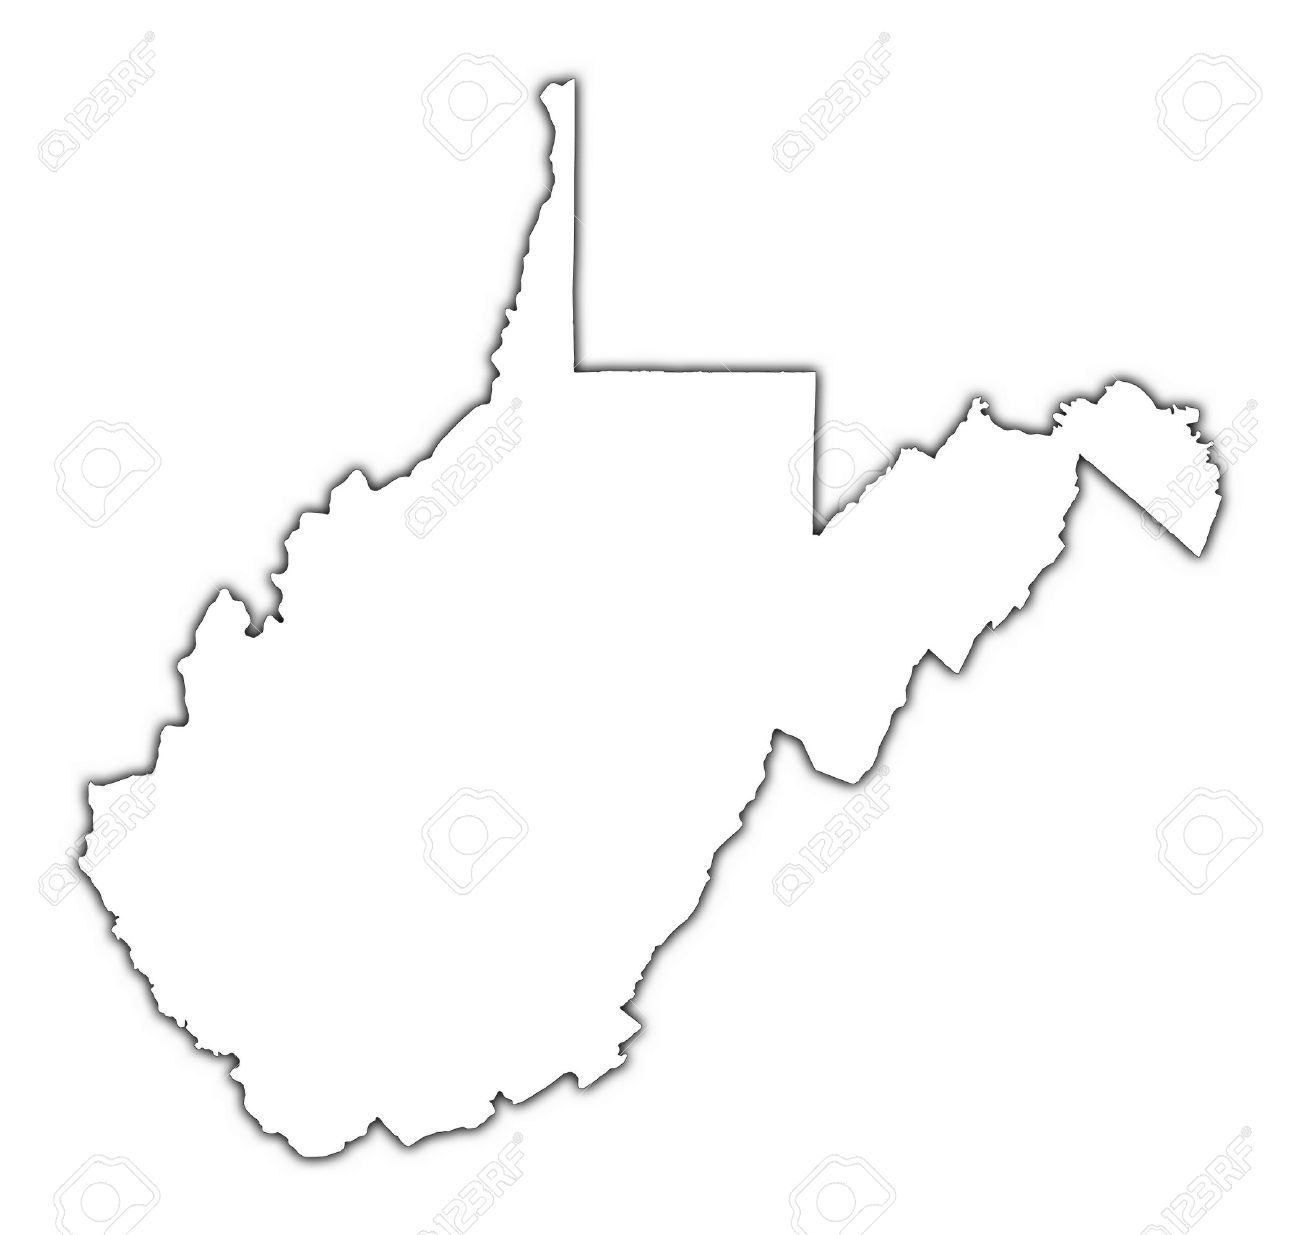 West virginia outline clipart collection jpg.